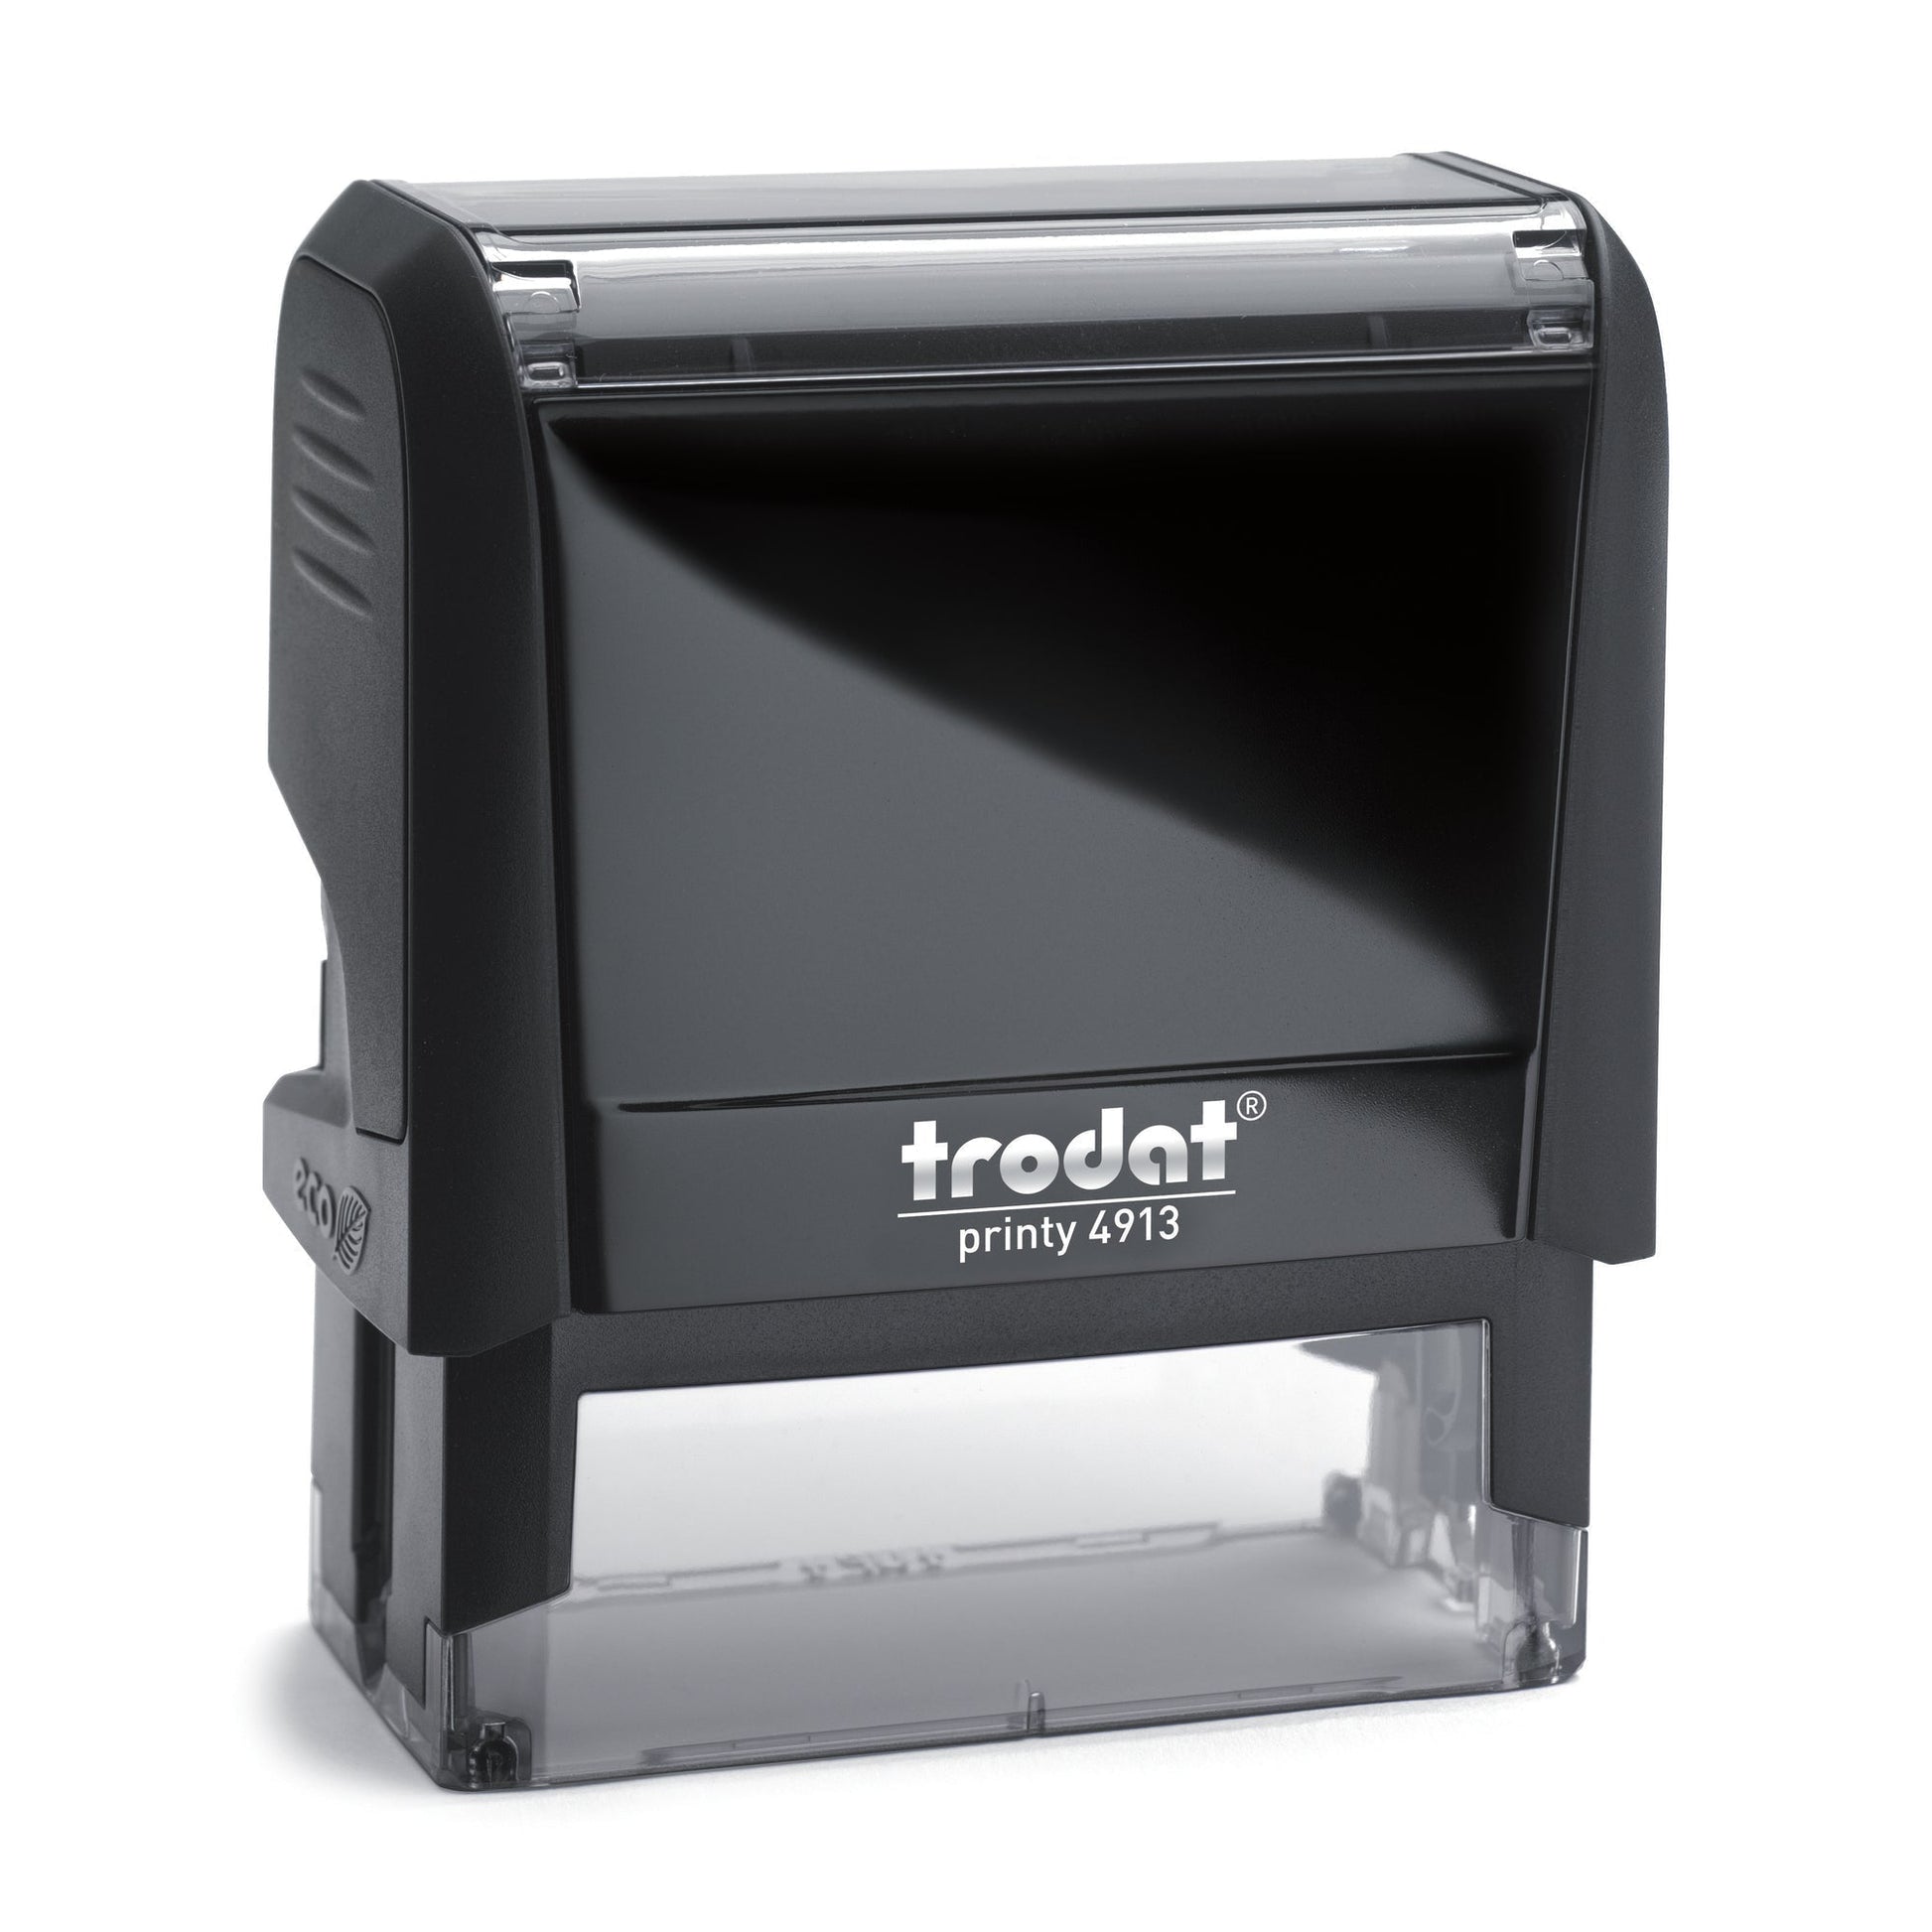 Approved Service To Manufacturers Schedule - Self Inking Rubber Stamp - Trodat 4913 - 55mm x 21mm Impression